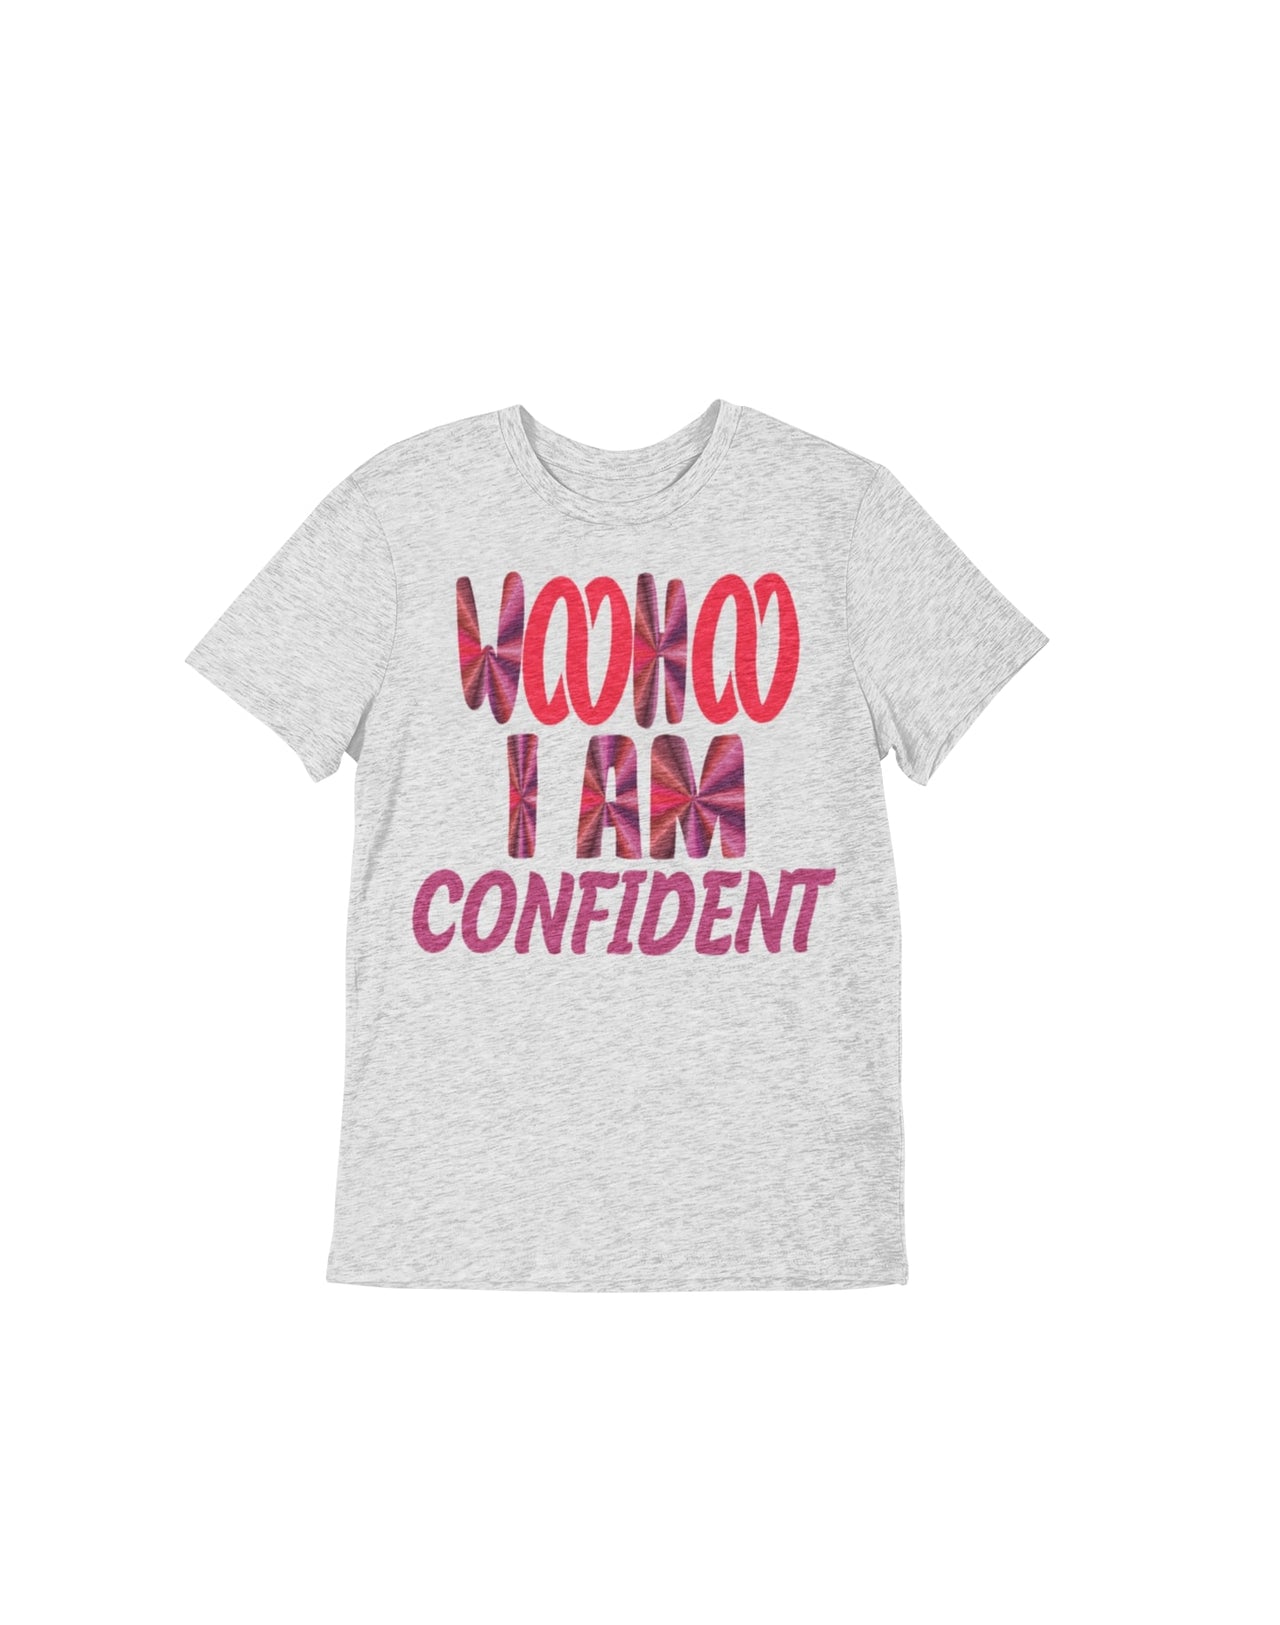 Heather Gray Unisex T-shirt featuring the text 'WooHoo I Am Confident' in a cool font, designed by WooHoo Apparel.